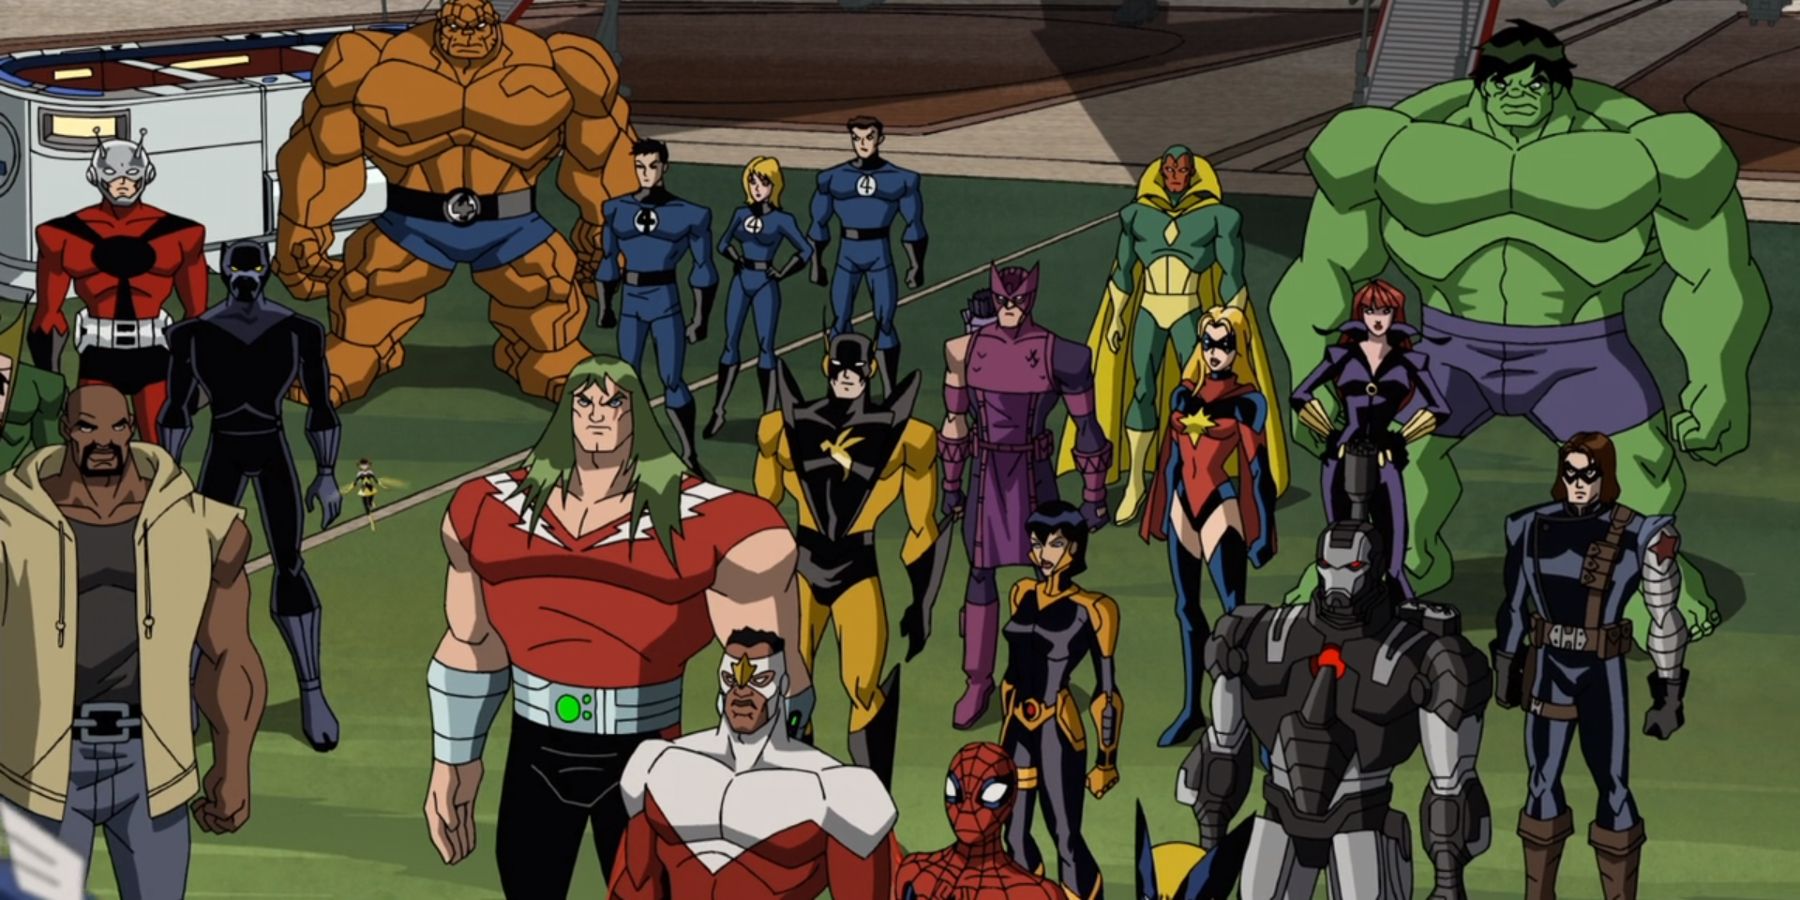 All of the Avengers assembled in Avengers: Earth's Mightiest Heroes